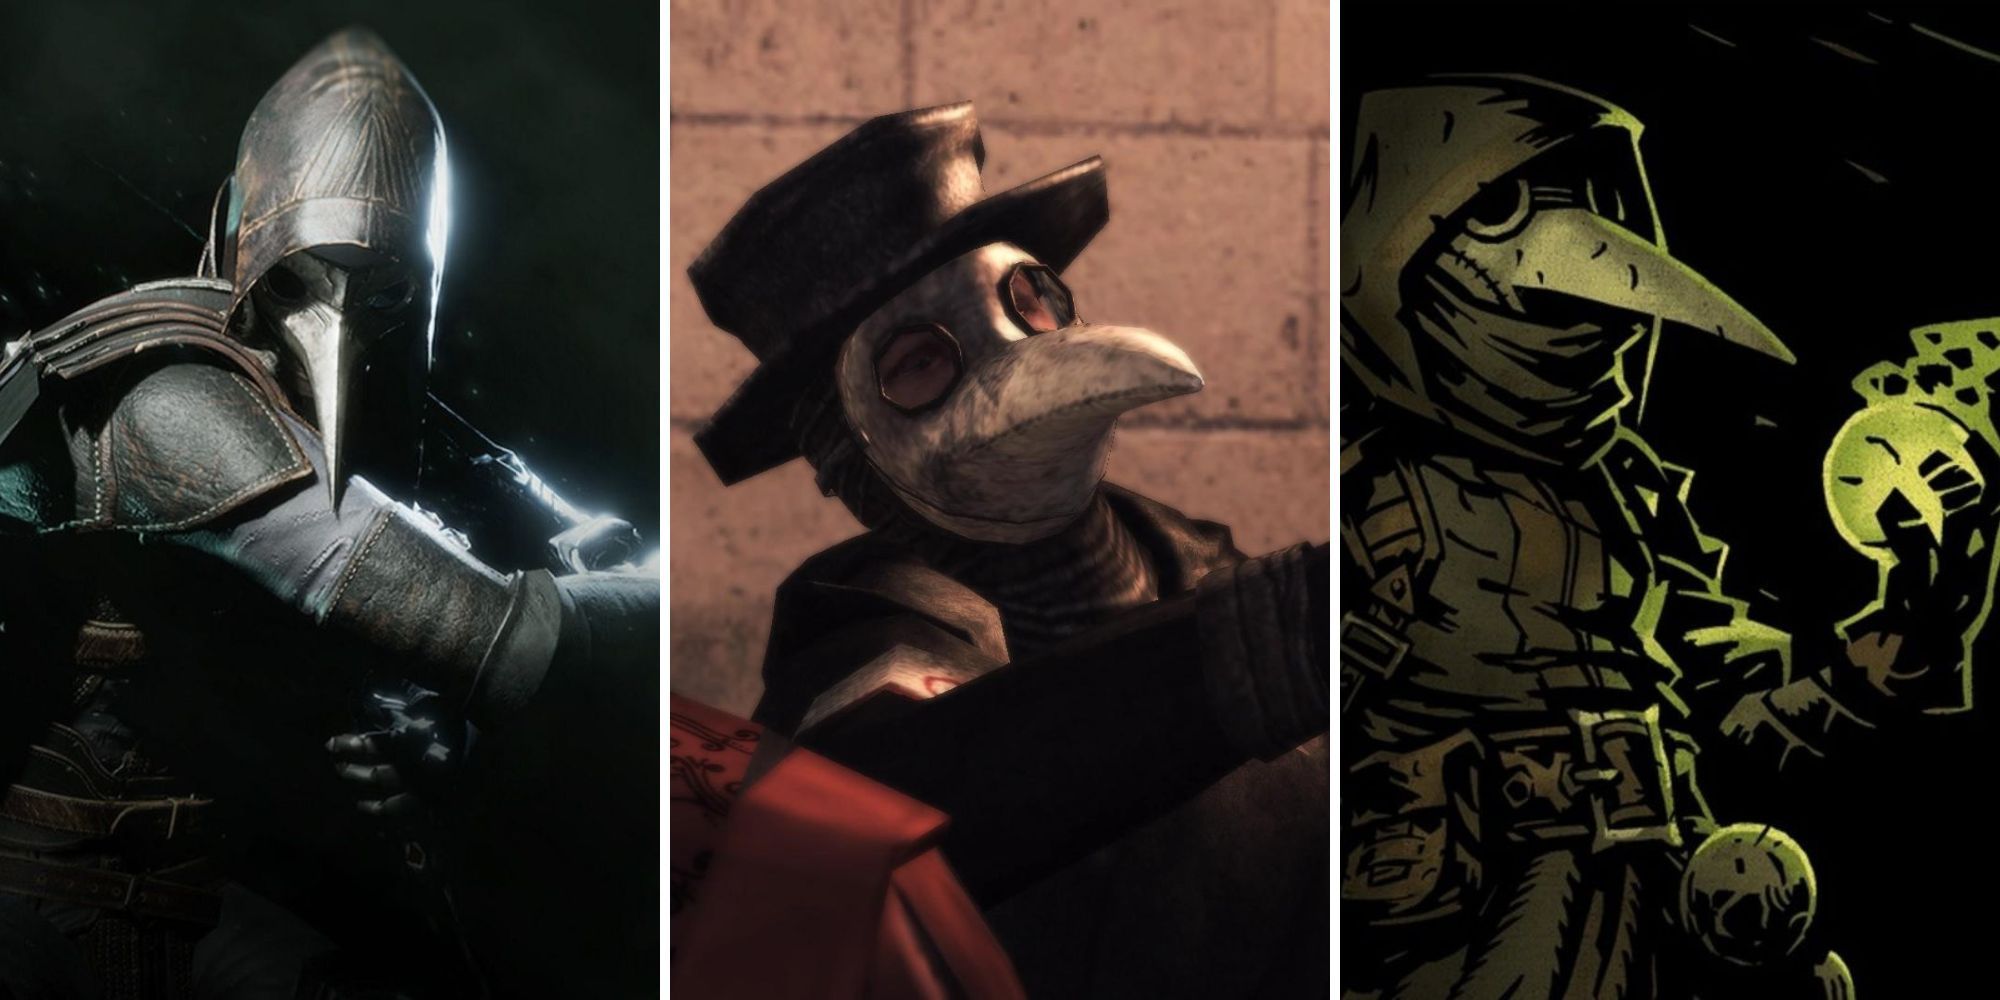 A grid of images showing three plague doctors from Thymesia, Assassin's Creed 2, and Darkest Dungeon